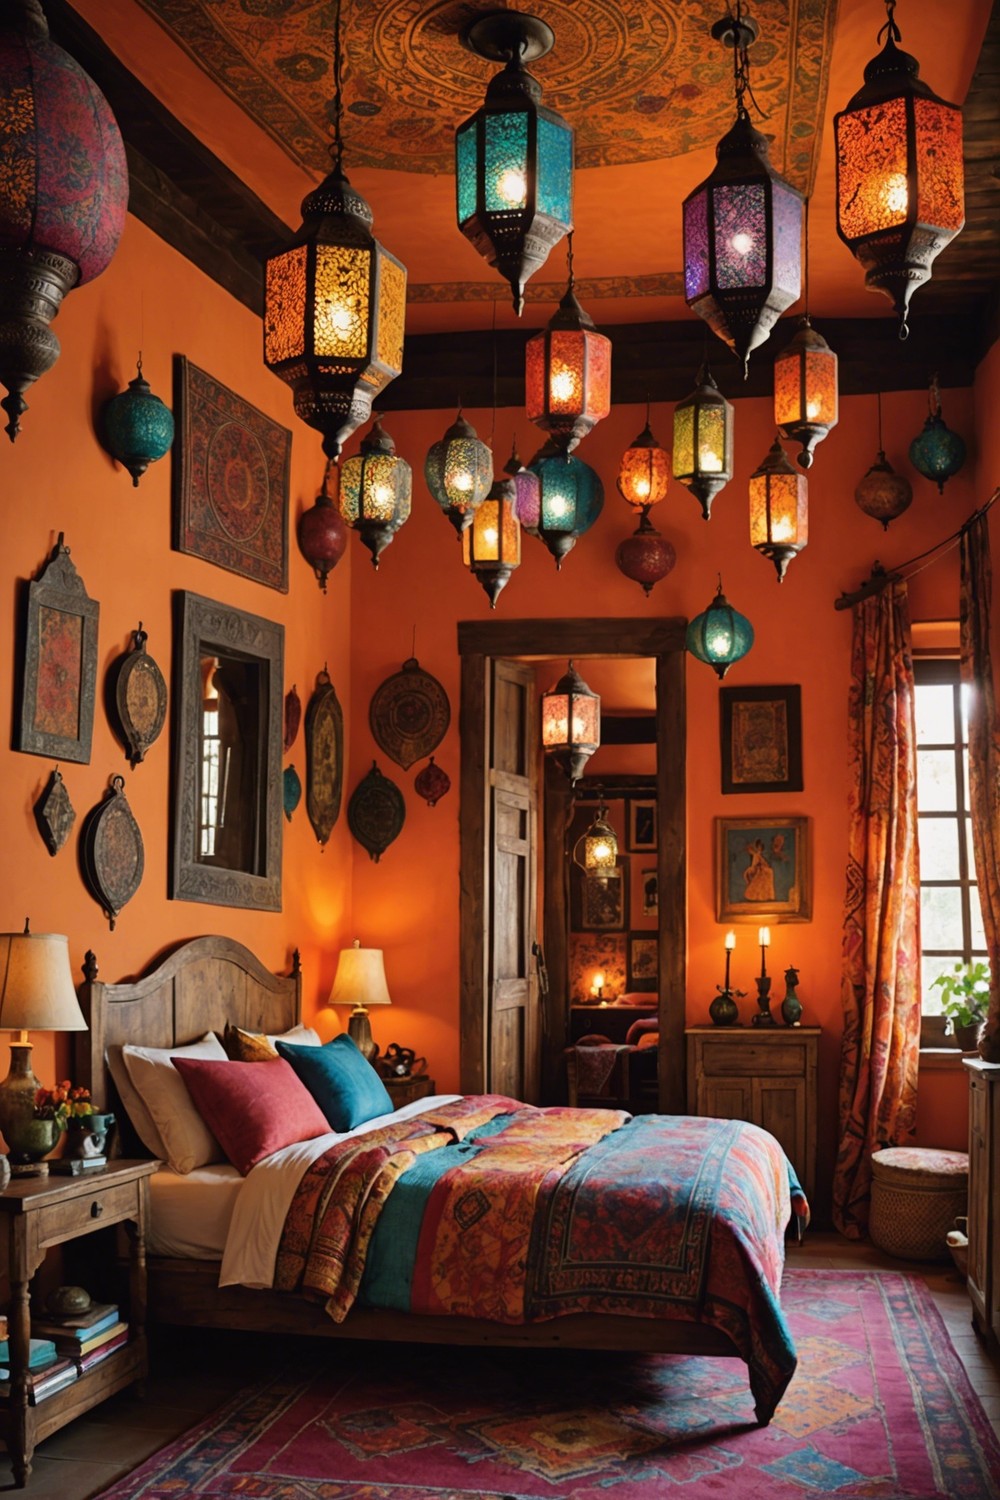 Global Nomad: Hanging Moroccan Lanterns above a Colorful Bedspread